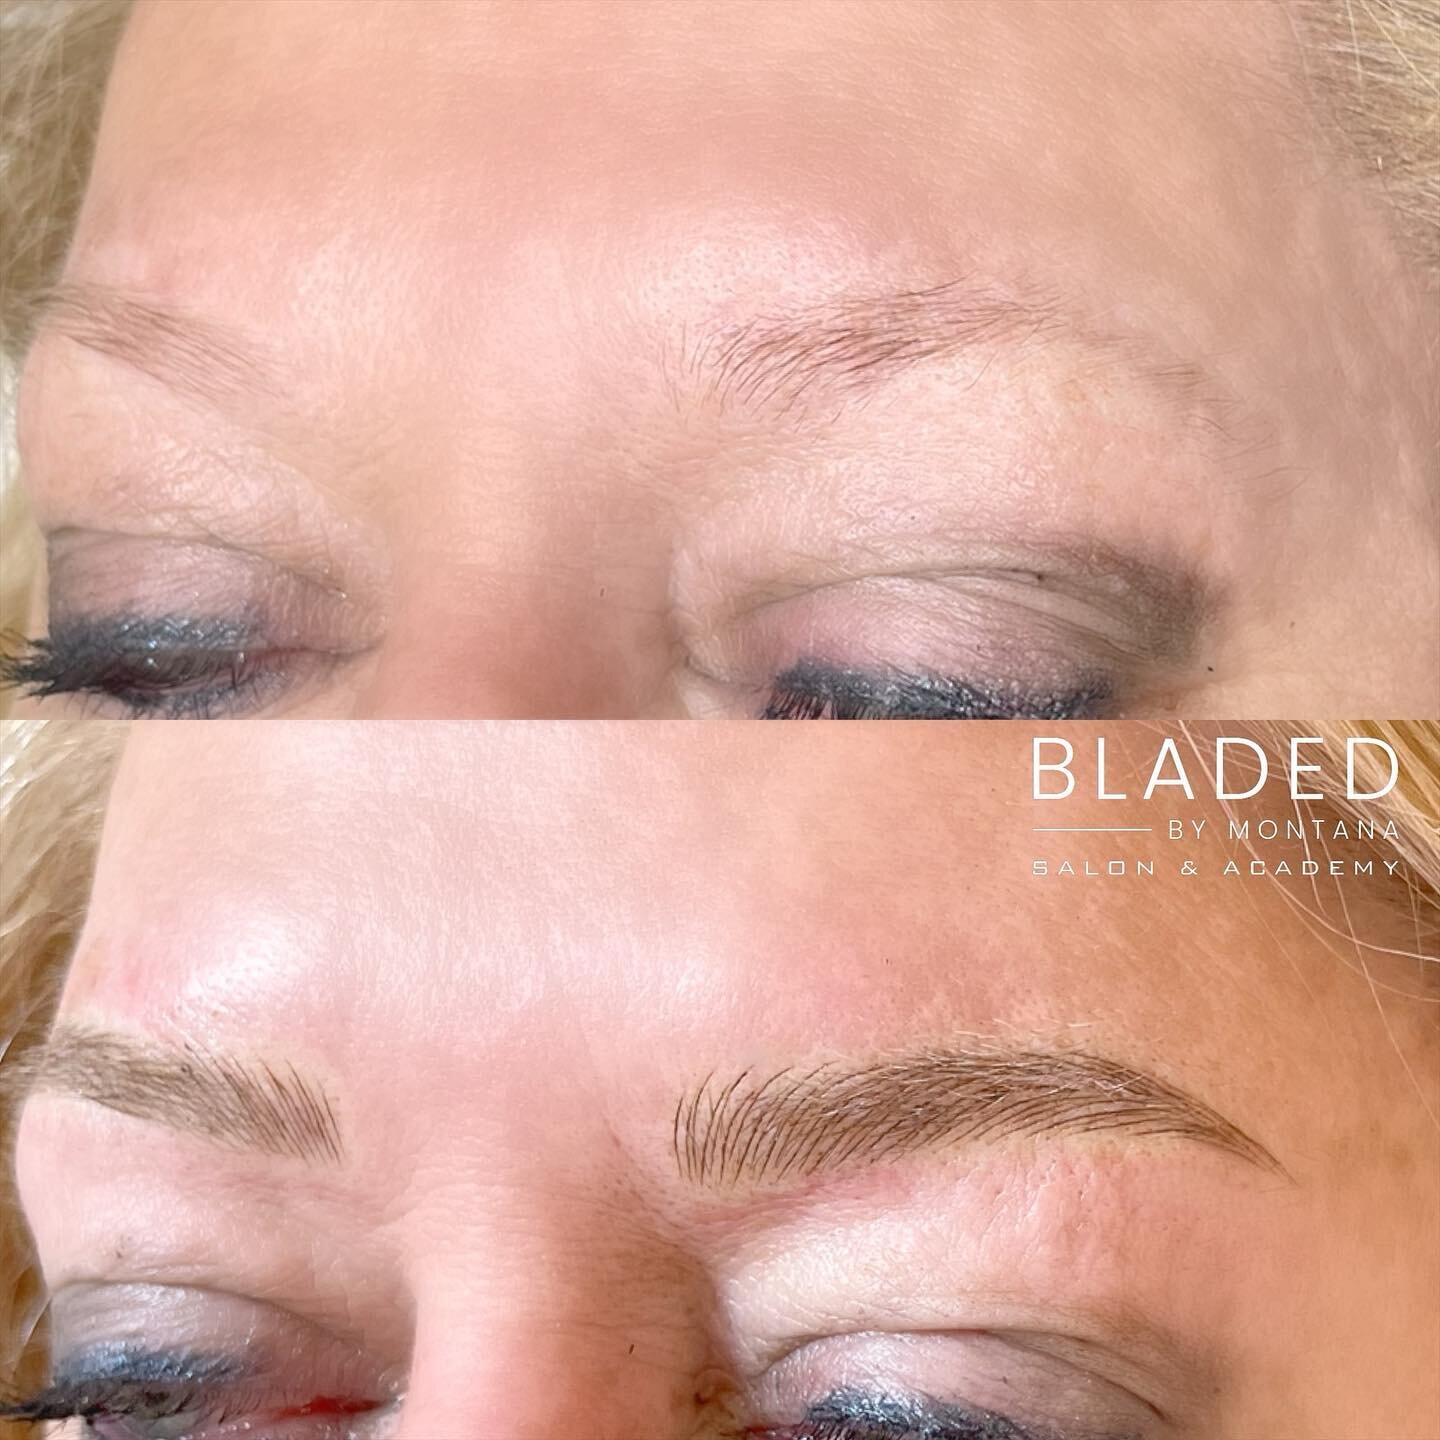 From nothing to something🪄

Her brows are summer ready!🌞 

Want to learn my signature brow techniques?
👉🏼𝐏𝐑𝐈𝐕𝐀𝐓𝐄 𝟏:𝟏 𝐀𝐍𝐃 𝐆𝐑𝐎𝐔𝐏 𝐓𝐑𝐀𝐈𝐍𝐈𝐍𝐆 𝐀𝐕𝐀𝐈𝐋𝐀𝐁𝐋𝐄

__________________________________________________

📧 For bookin